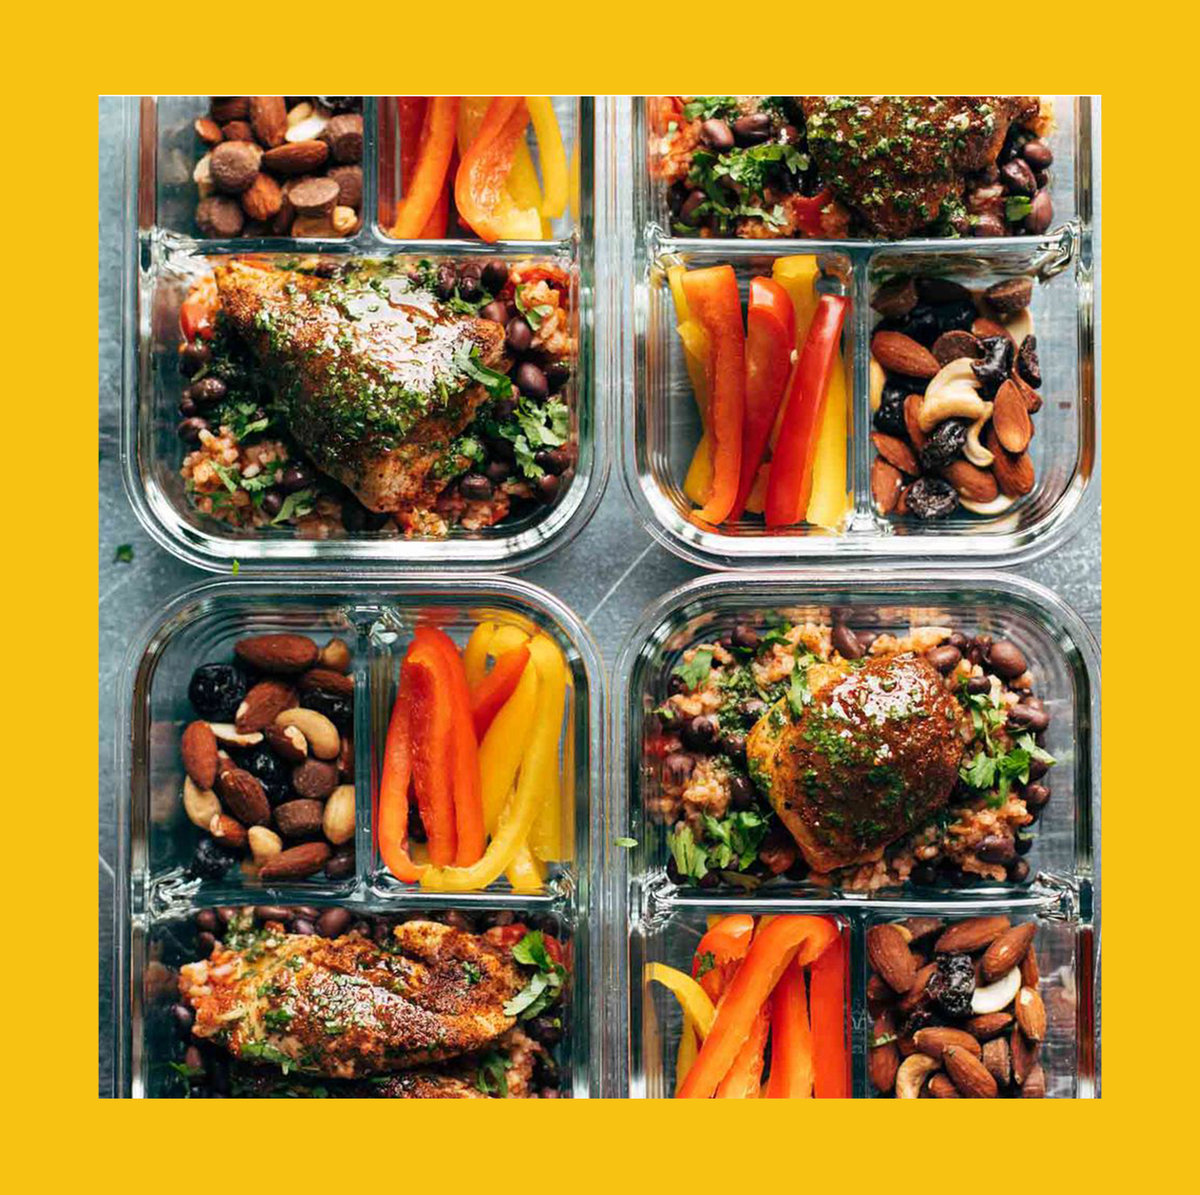 12 Delicious Bento Lunch Box Recipes - Packed Lunches for Adults